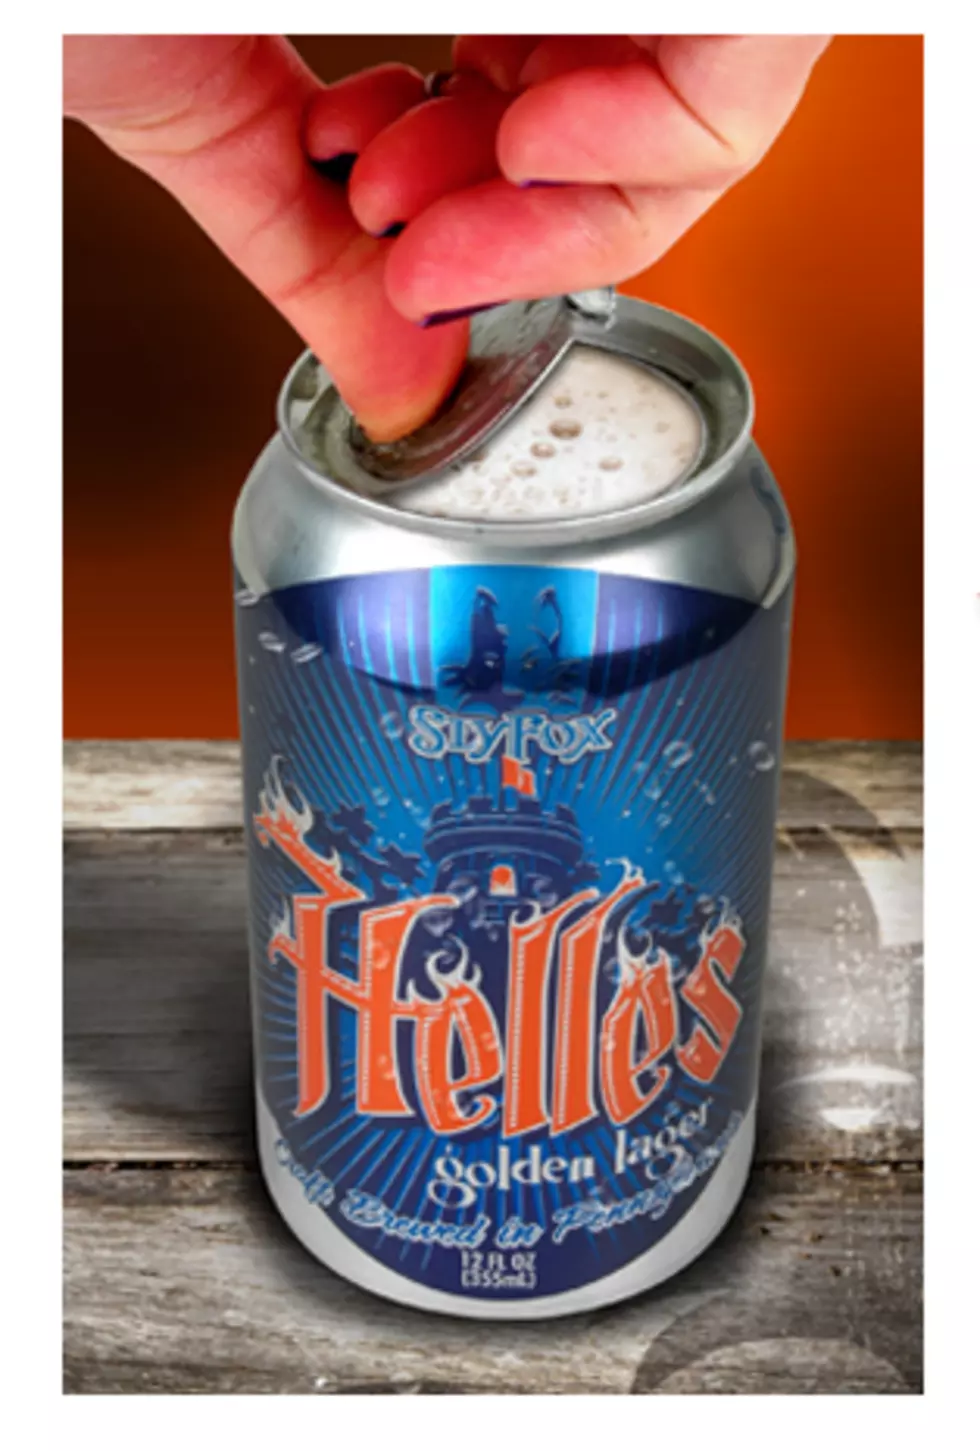 New Beer Can Claims to Boost Flavor and Aroma